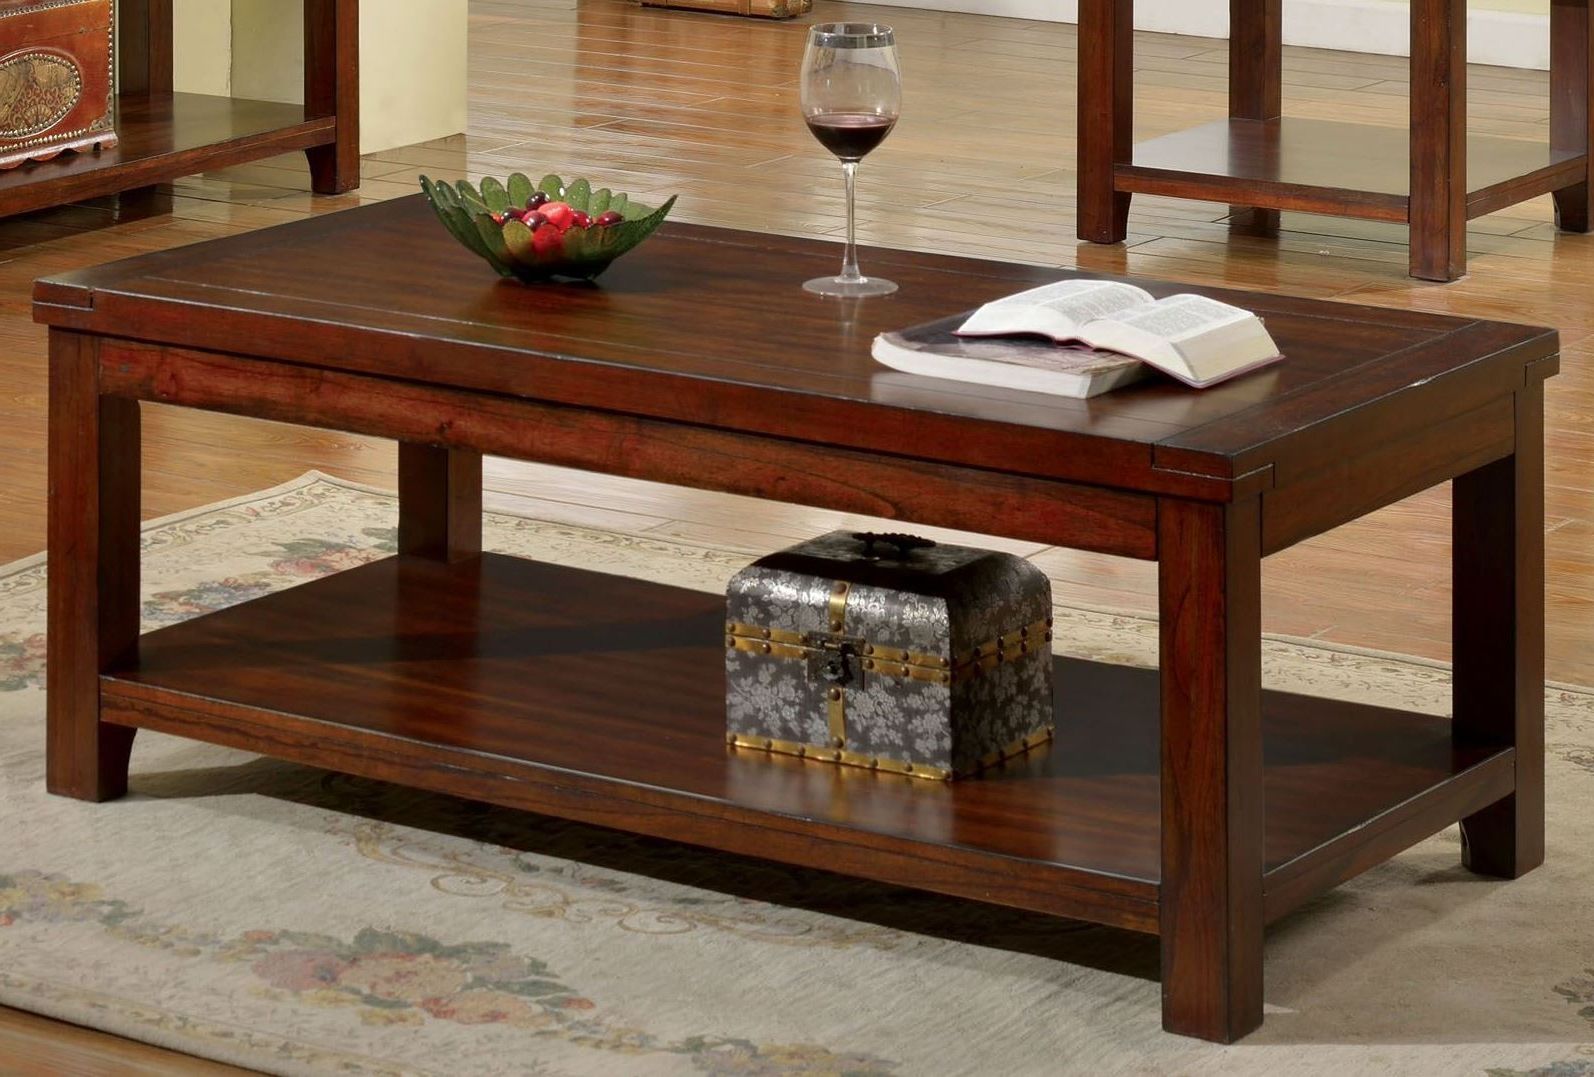 Heartwood Cherry Wood Coffee Tables Intended For Best And Newest Estell Cherry Coffee Table From Furniture Of America (cm4107c (View 1 of 10)